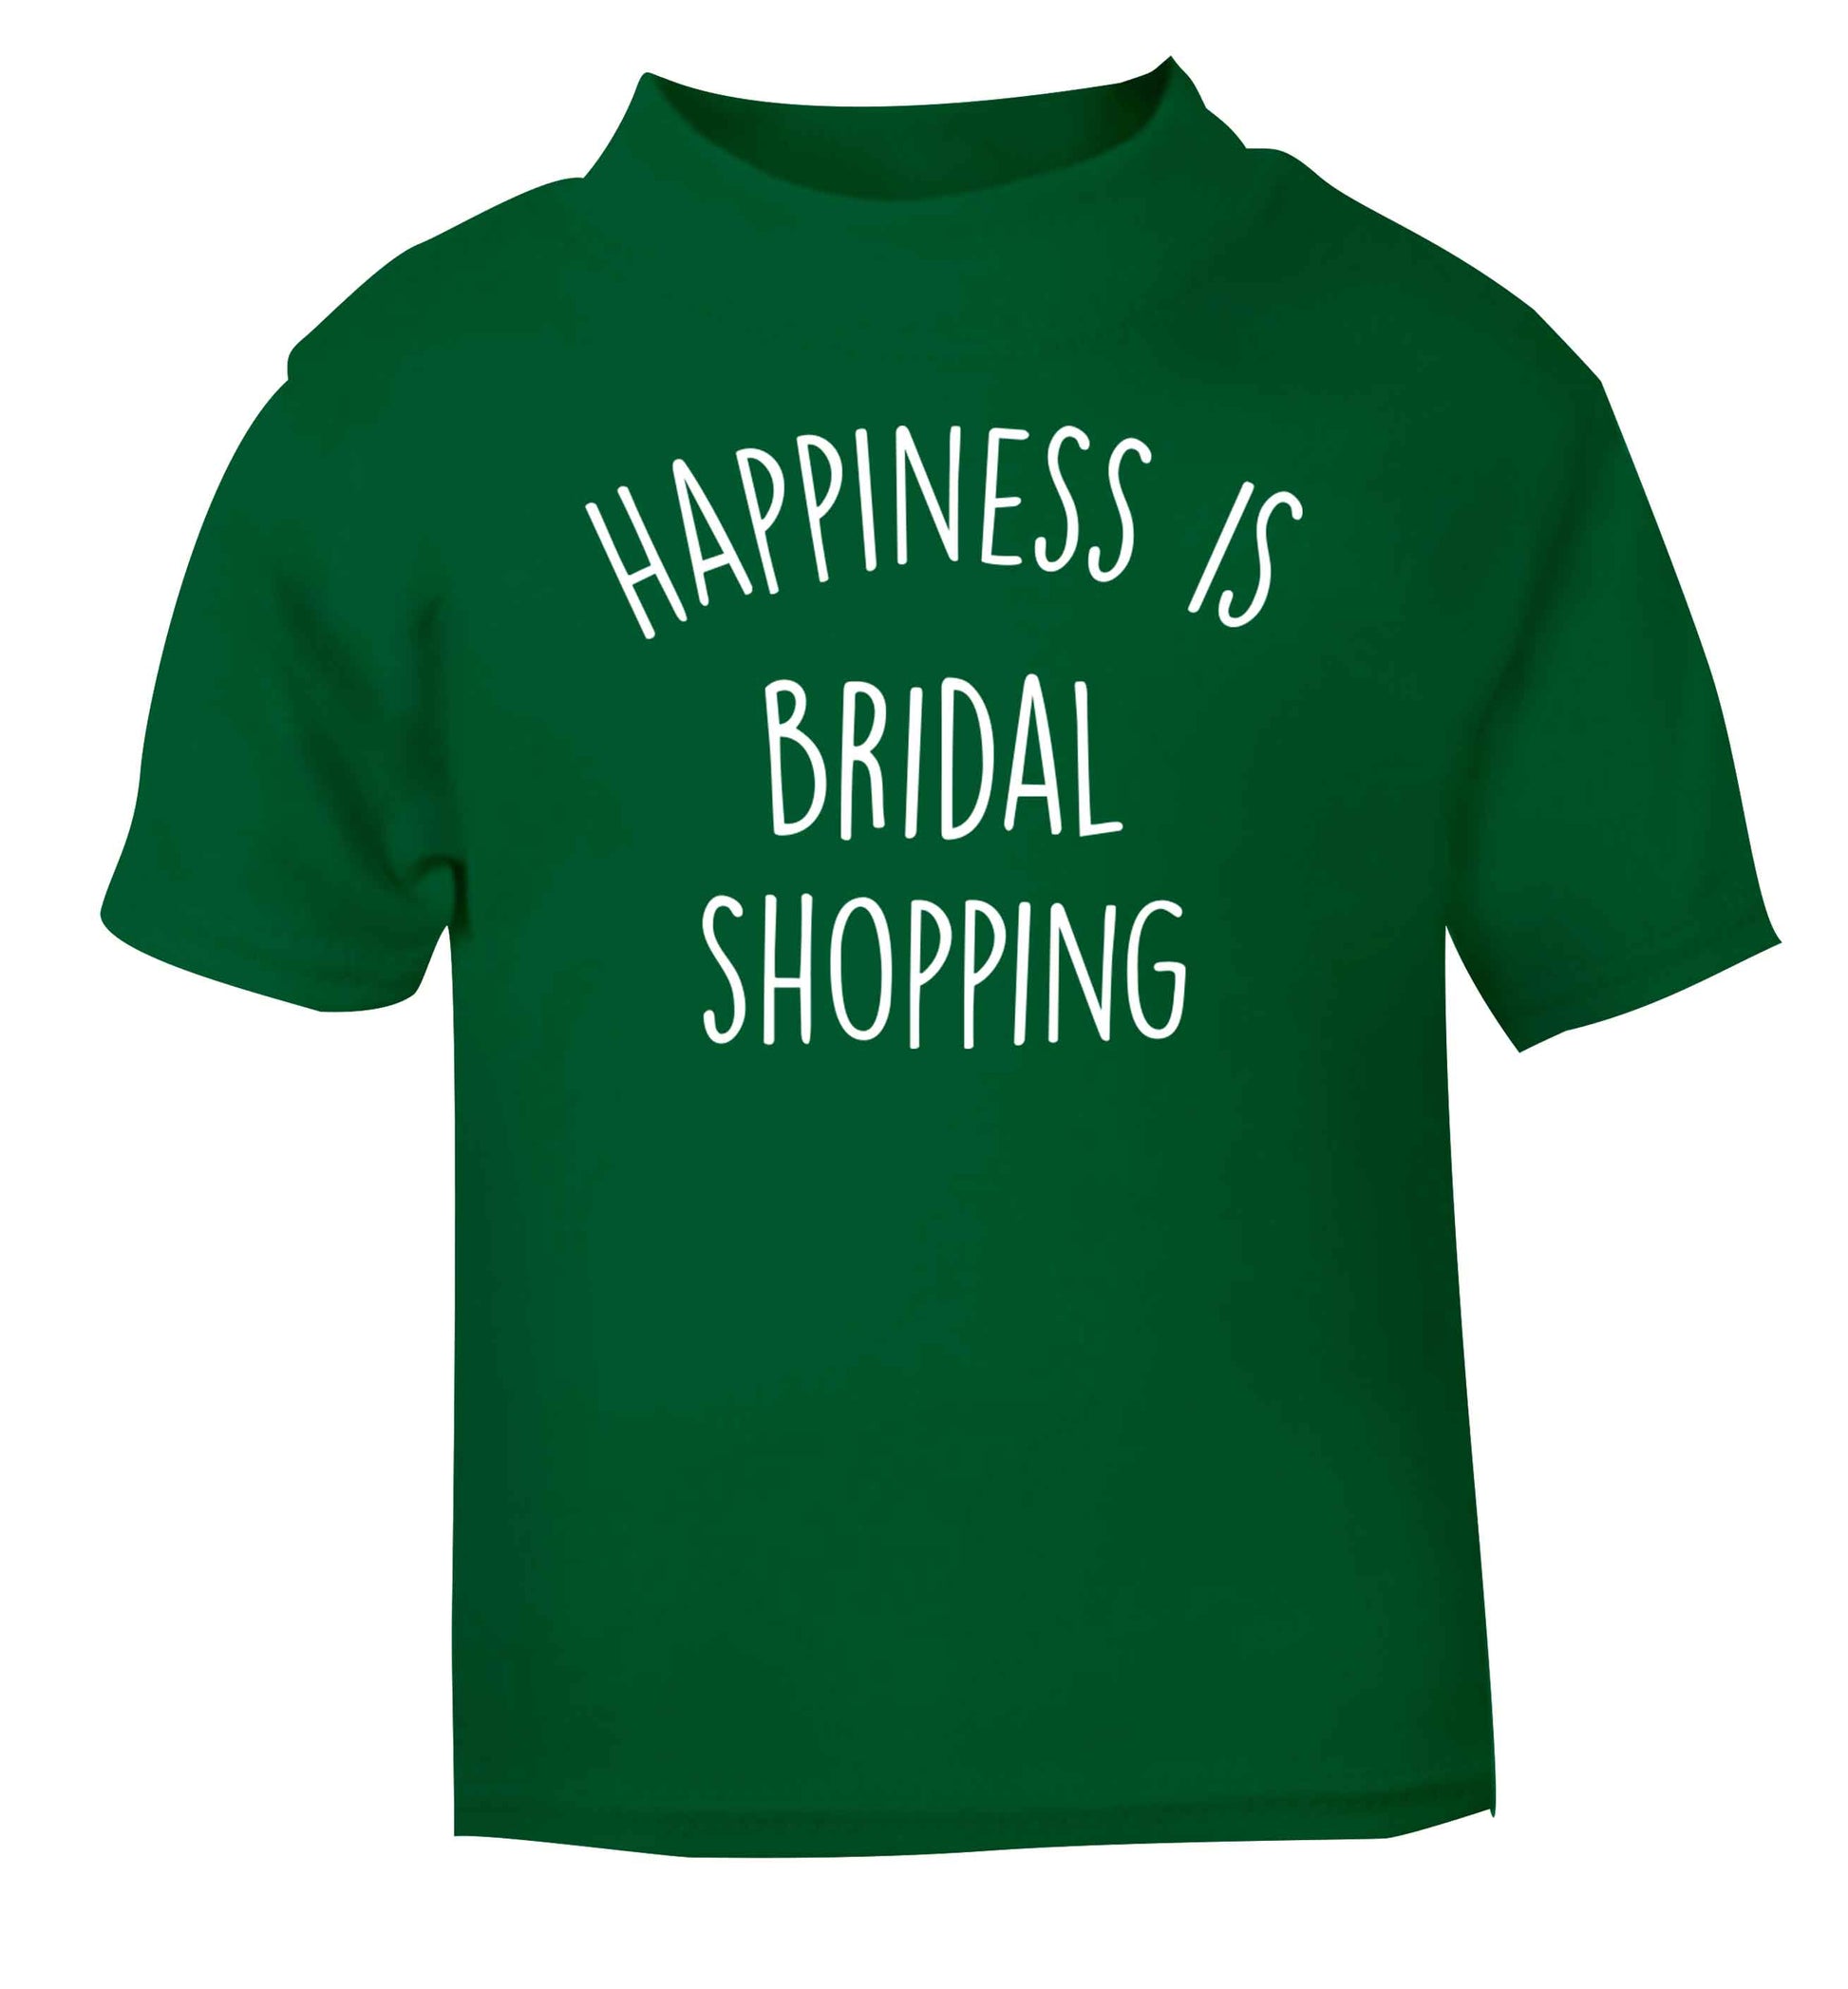 Happiness is bridal shopping green baby toddler Tshirt 2 Years